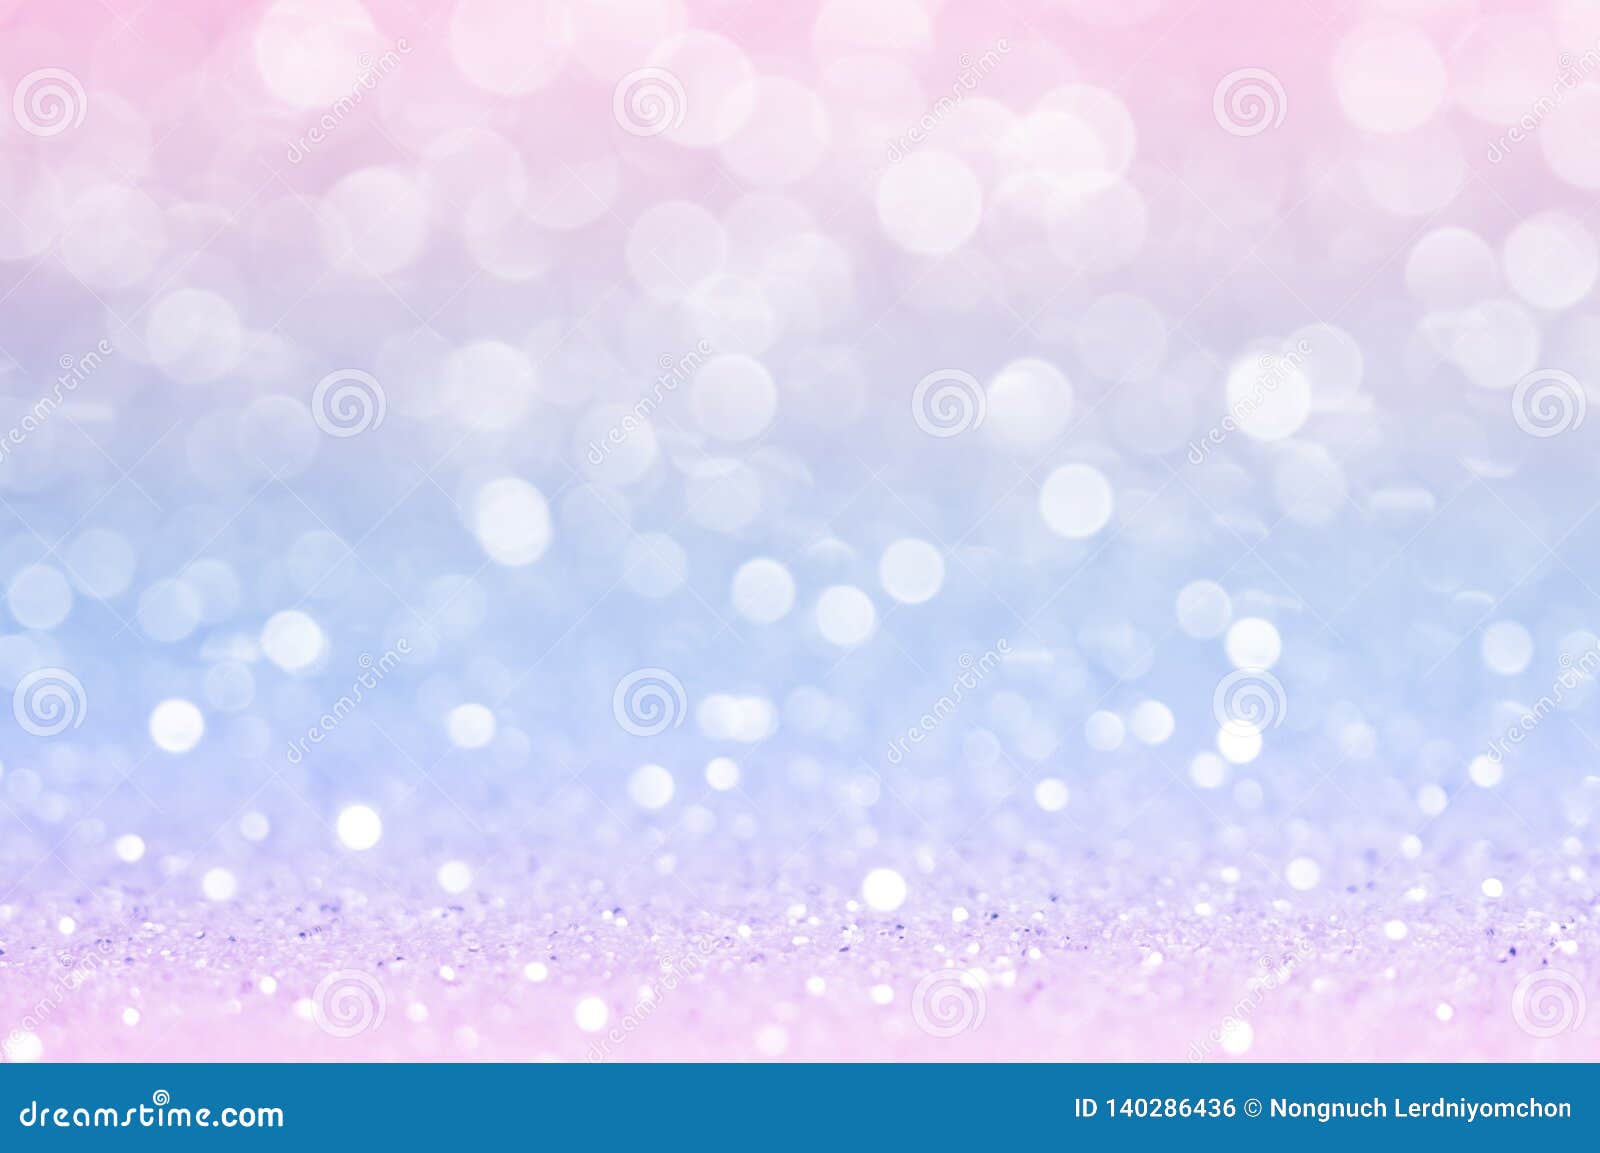 pink blue, pink bokeh,circle abstract light background,pink gold shining lights, sparkling glittering valentines day,women day or